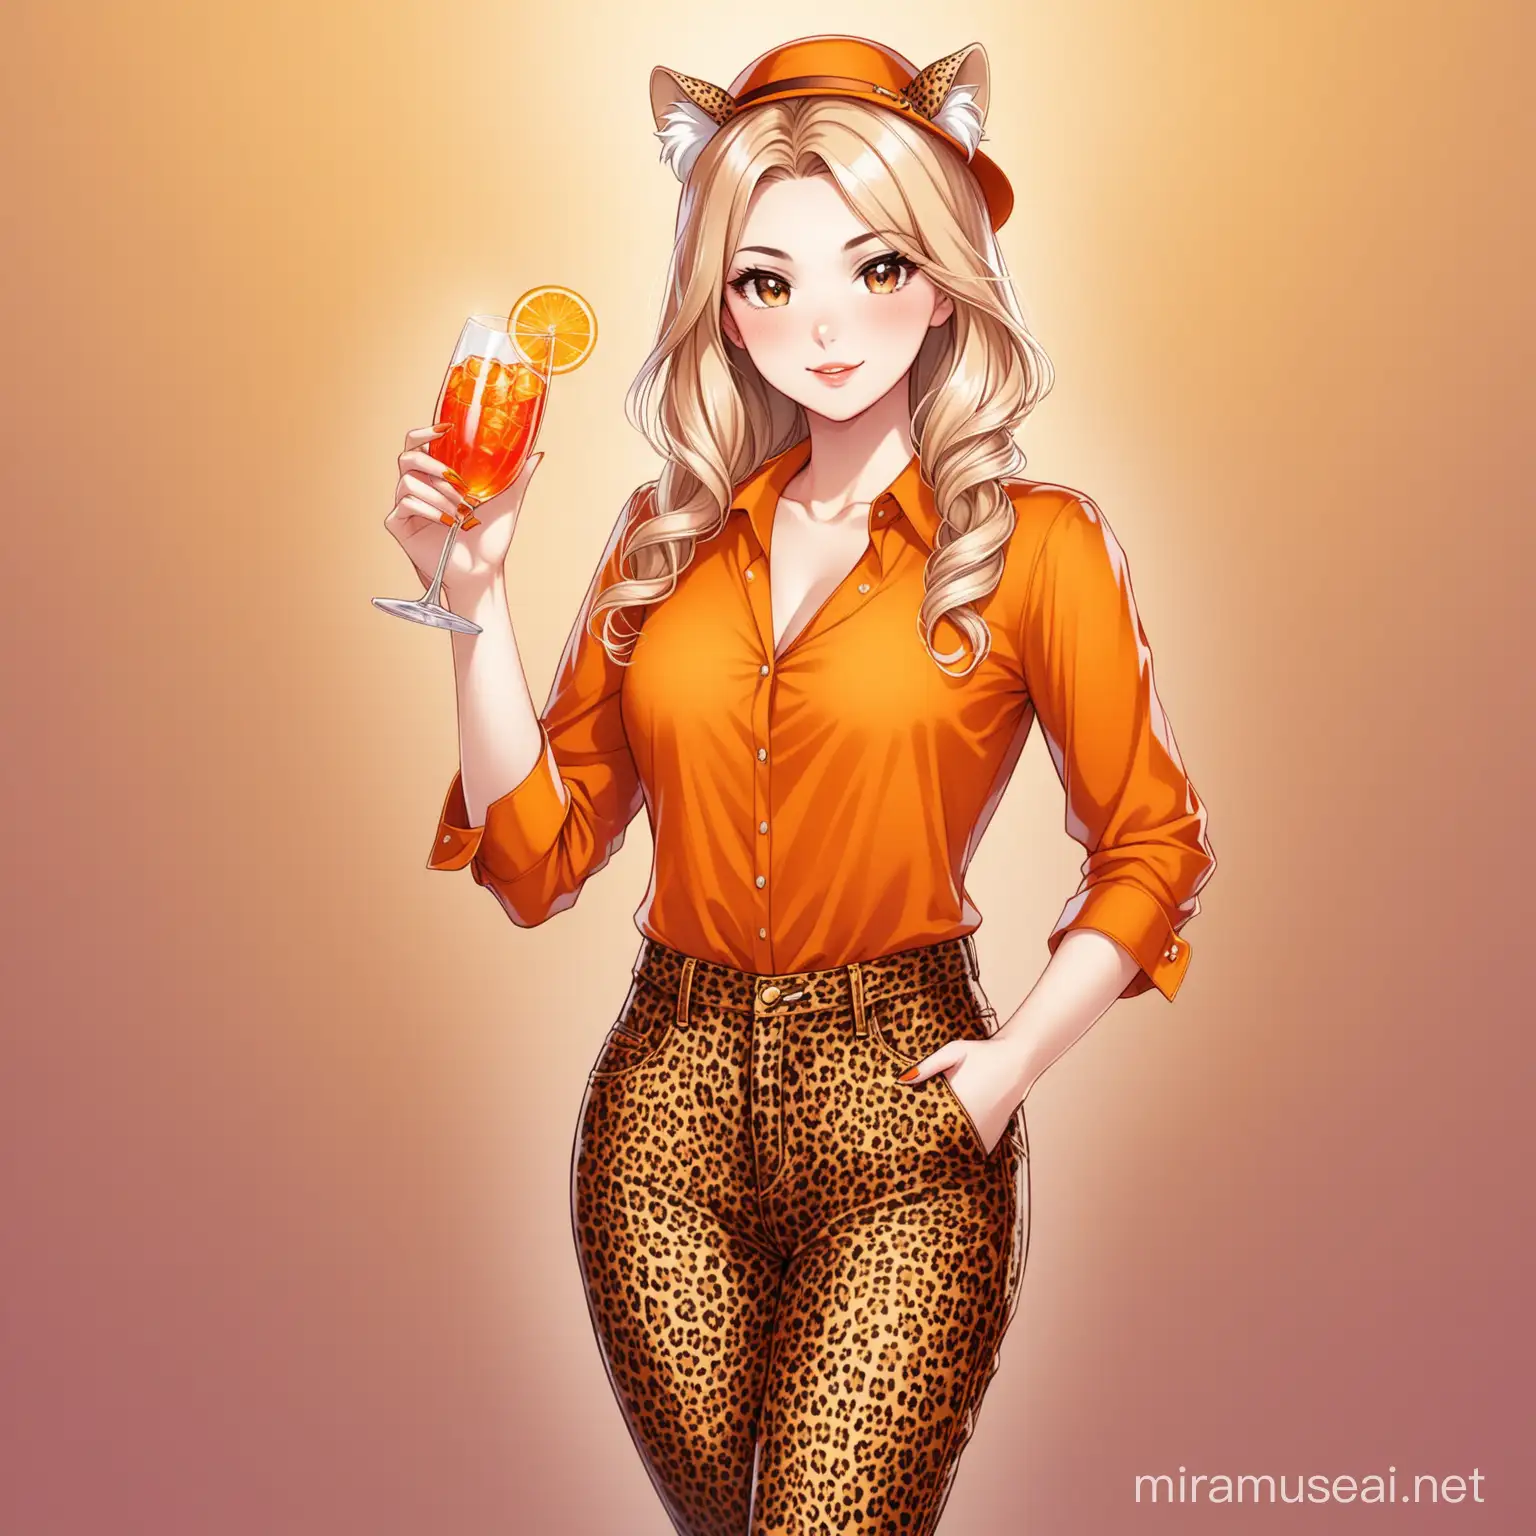 My name is Marjolein. I am 27 years old and identify myself as an ex-horse girl who is now a management consultant. My favorite drink is Aperol Spritz and my favorite piece of clothing is my leopard jeans. How should I dress up for the theme party with my friends? Please depict a costume.